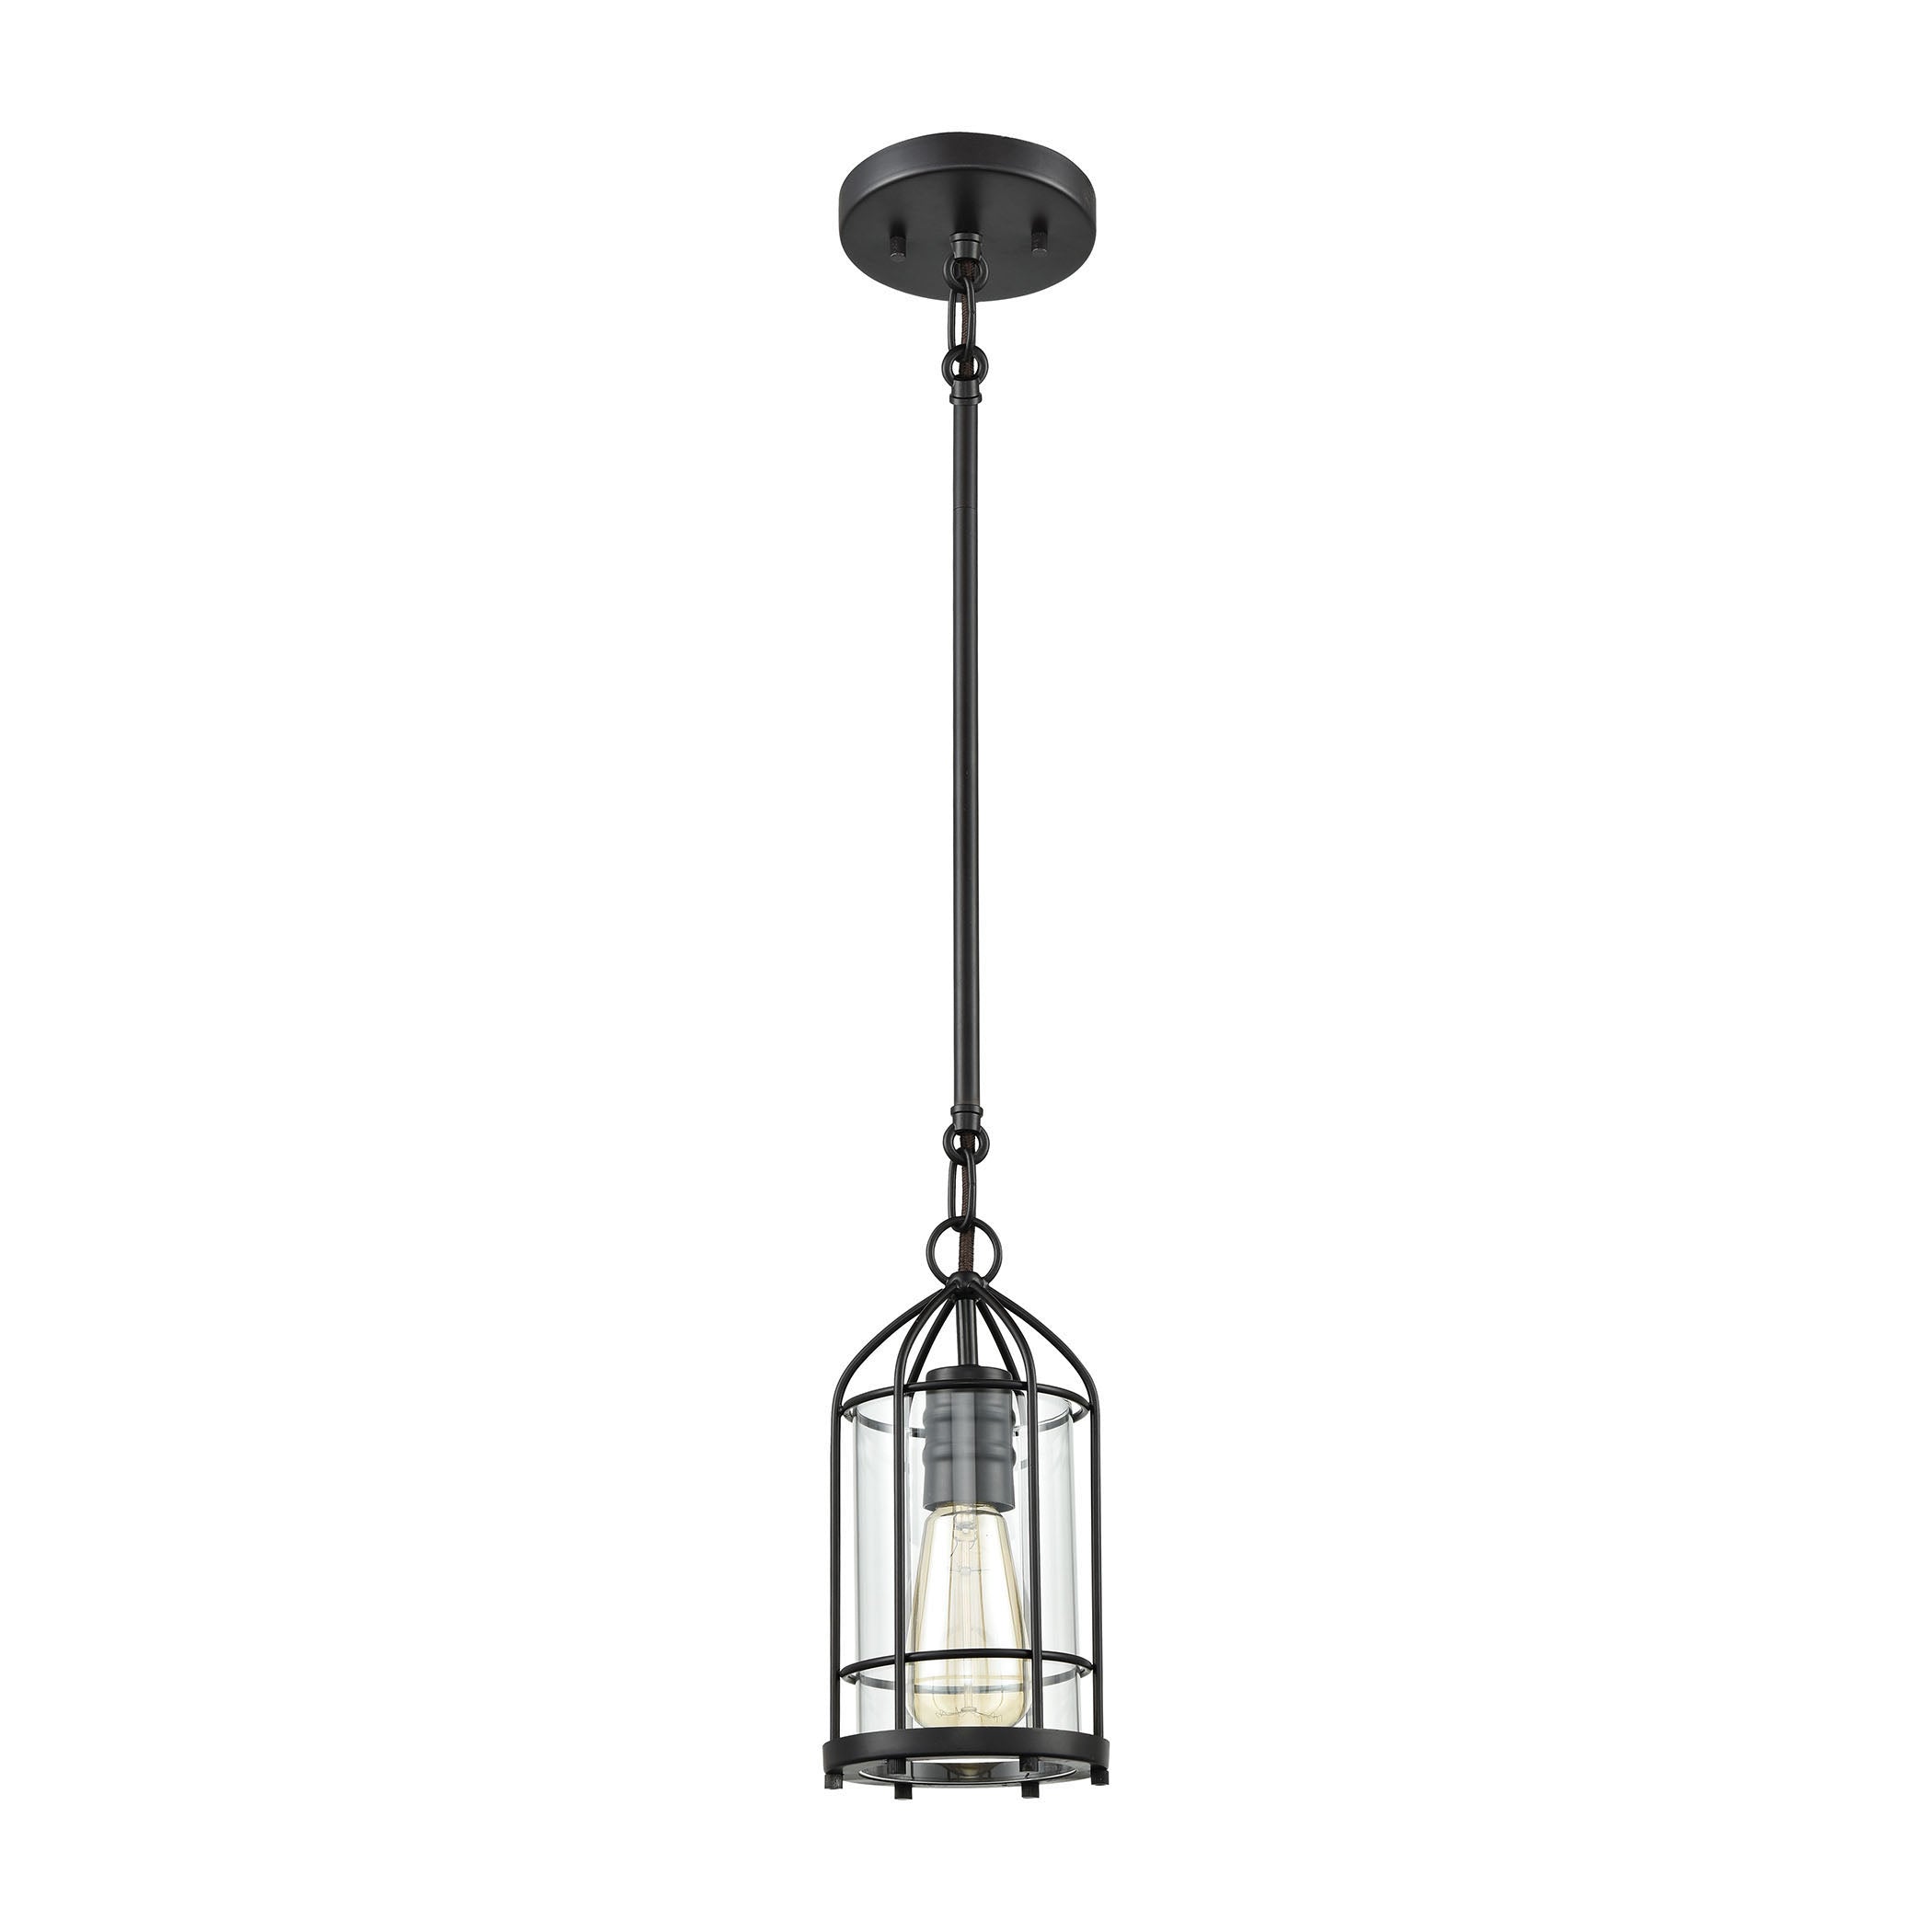 ELK Lighting 46284/1 Southwick 1-Light Mini Pendant in Oil Rubbed Bronze with Clear Blown Glass